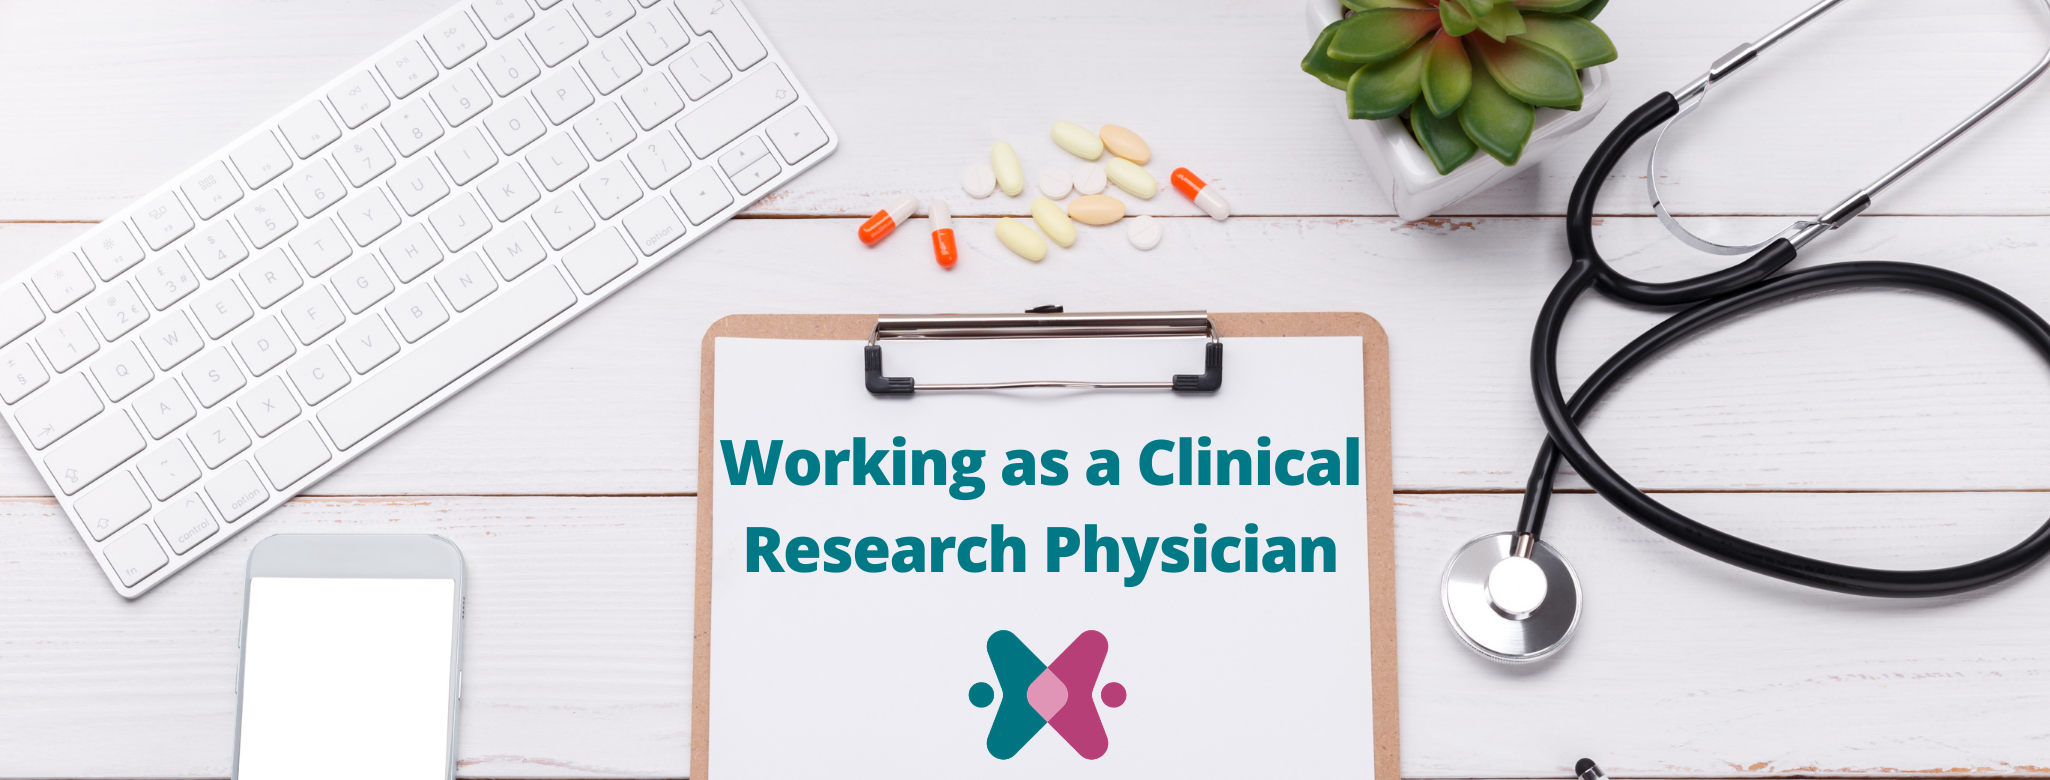 Clinical Research Physician